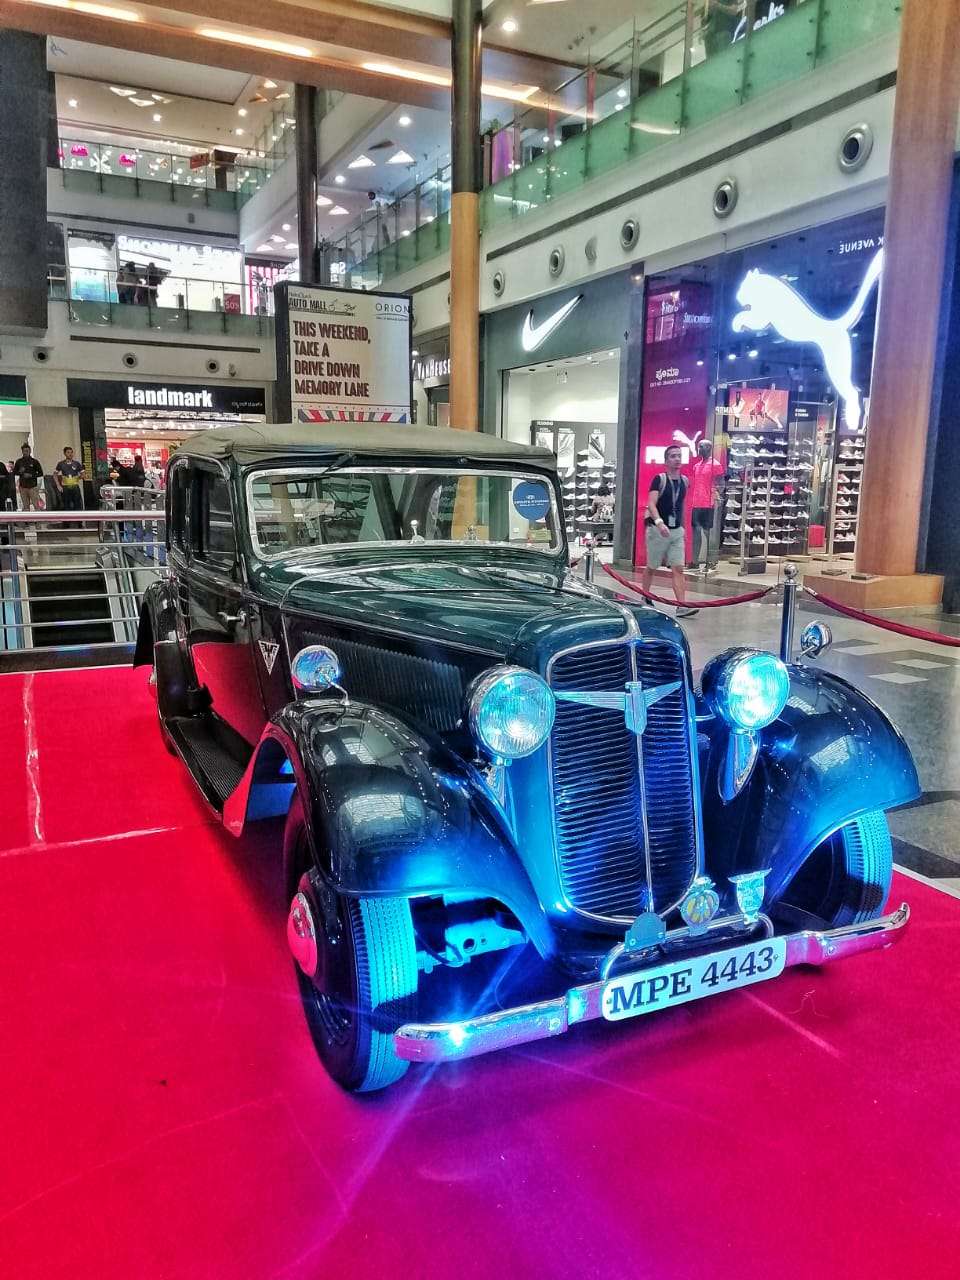 This Classic Car Show From Bangalore Hints At The Sky High Public Ardour For These Machines Today! 1